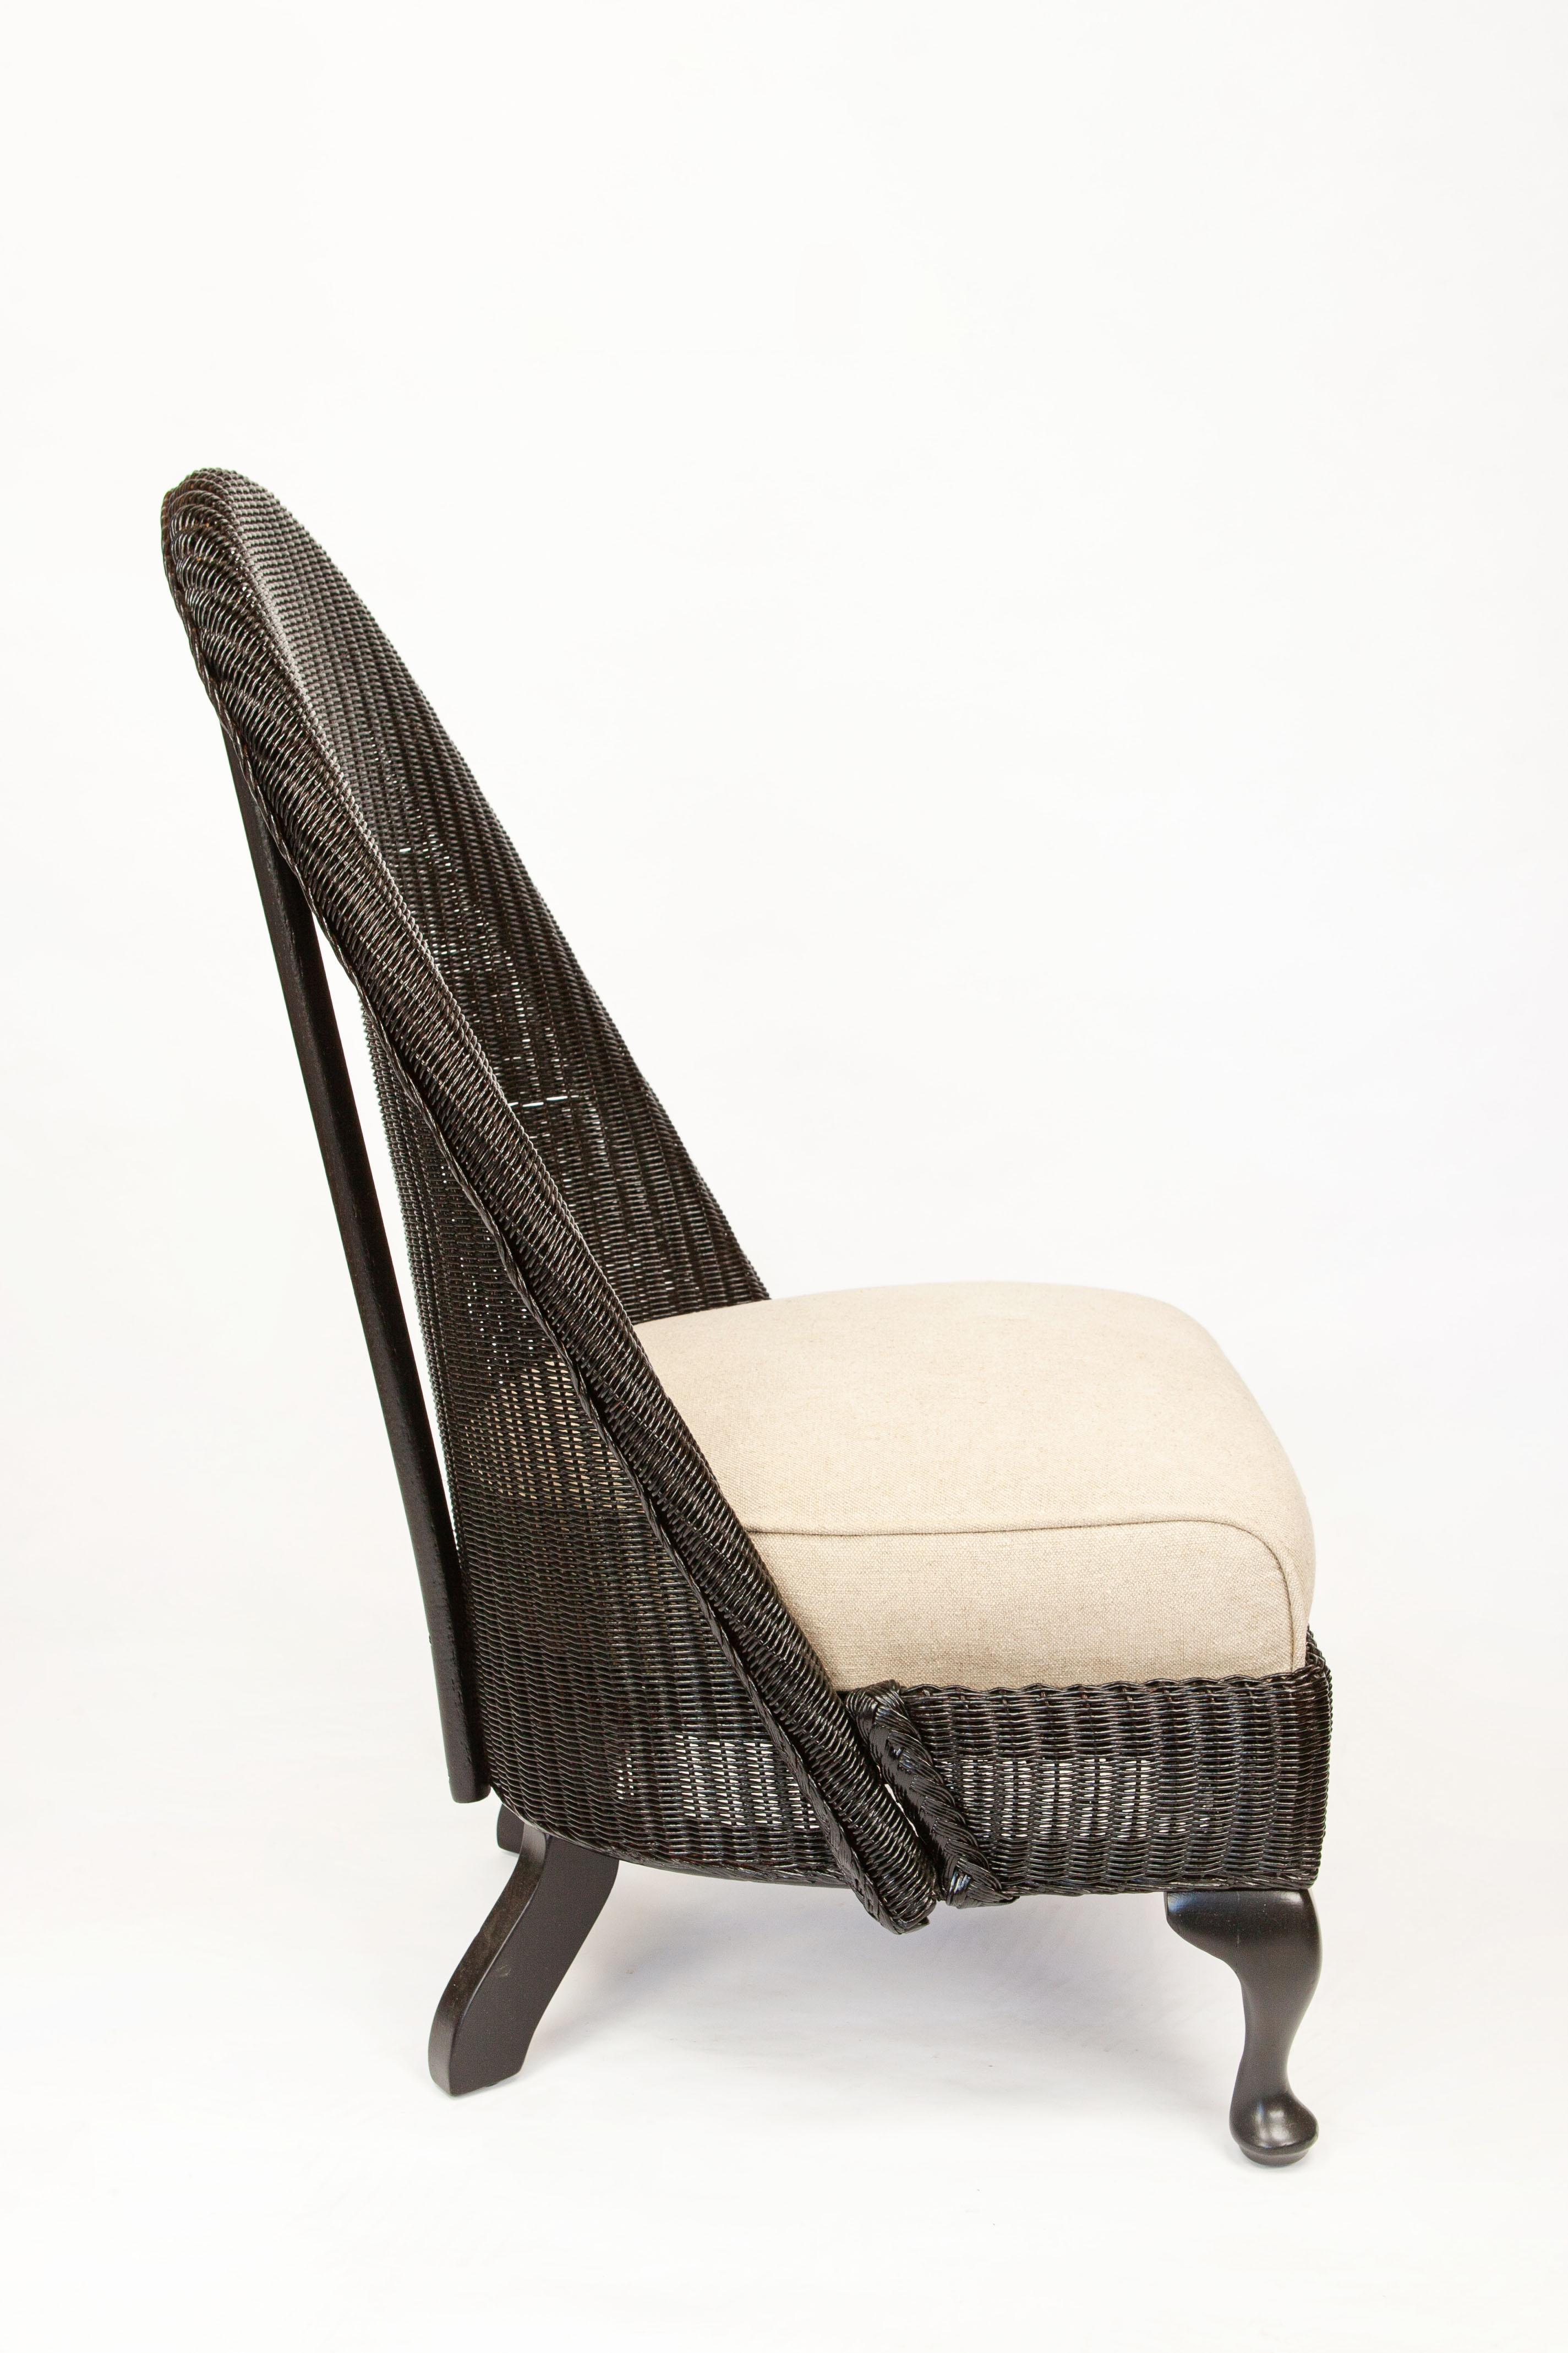 American Antique Lloyd Loom Wicker Slipper Chair, Newly Painted in Black Lacquer